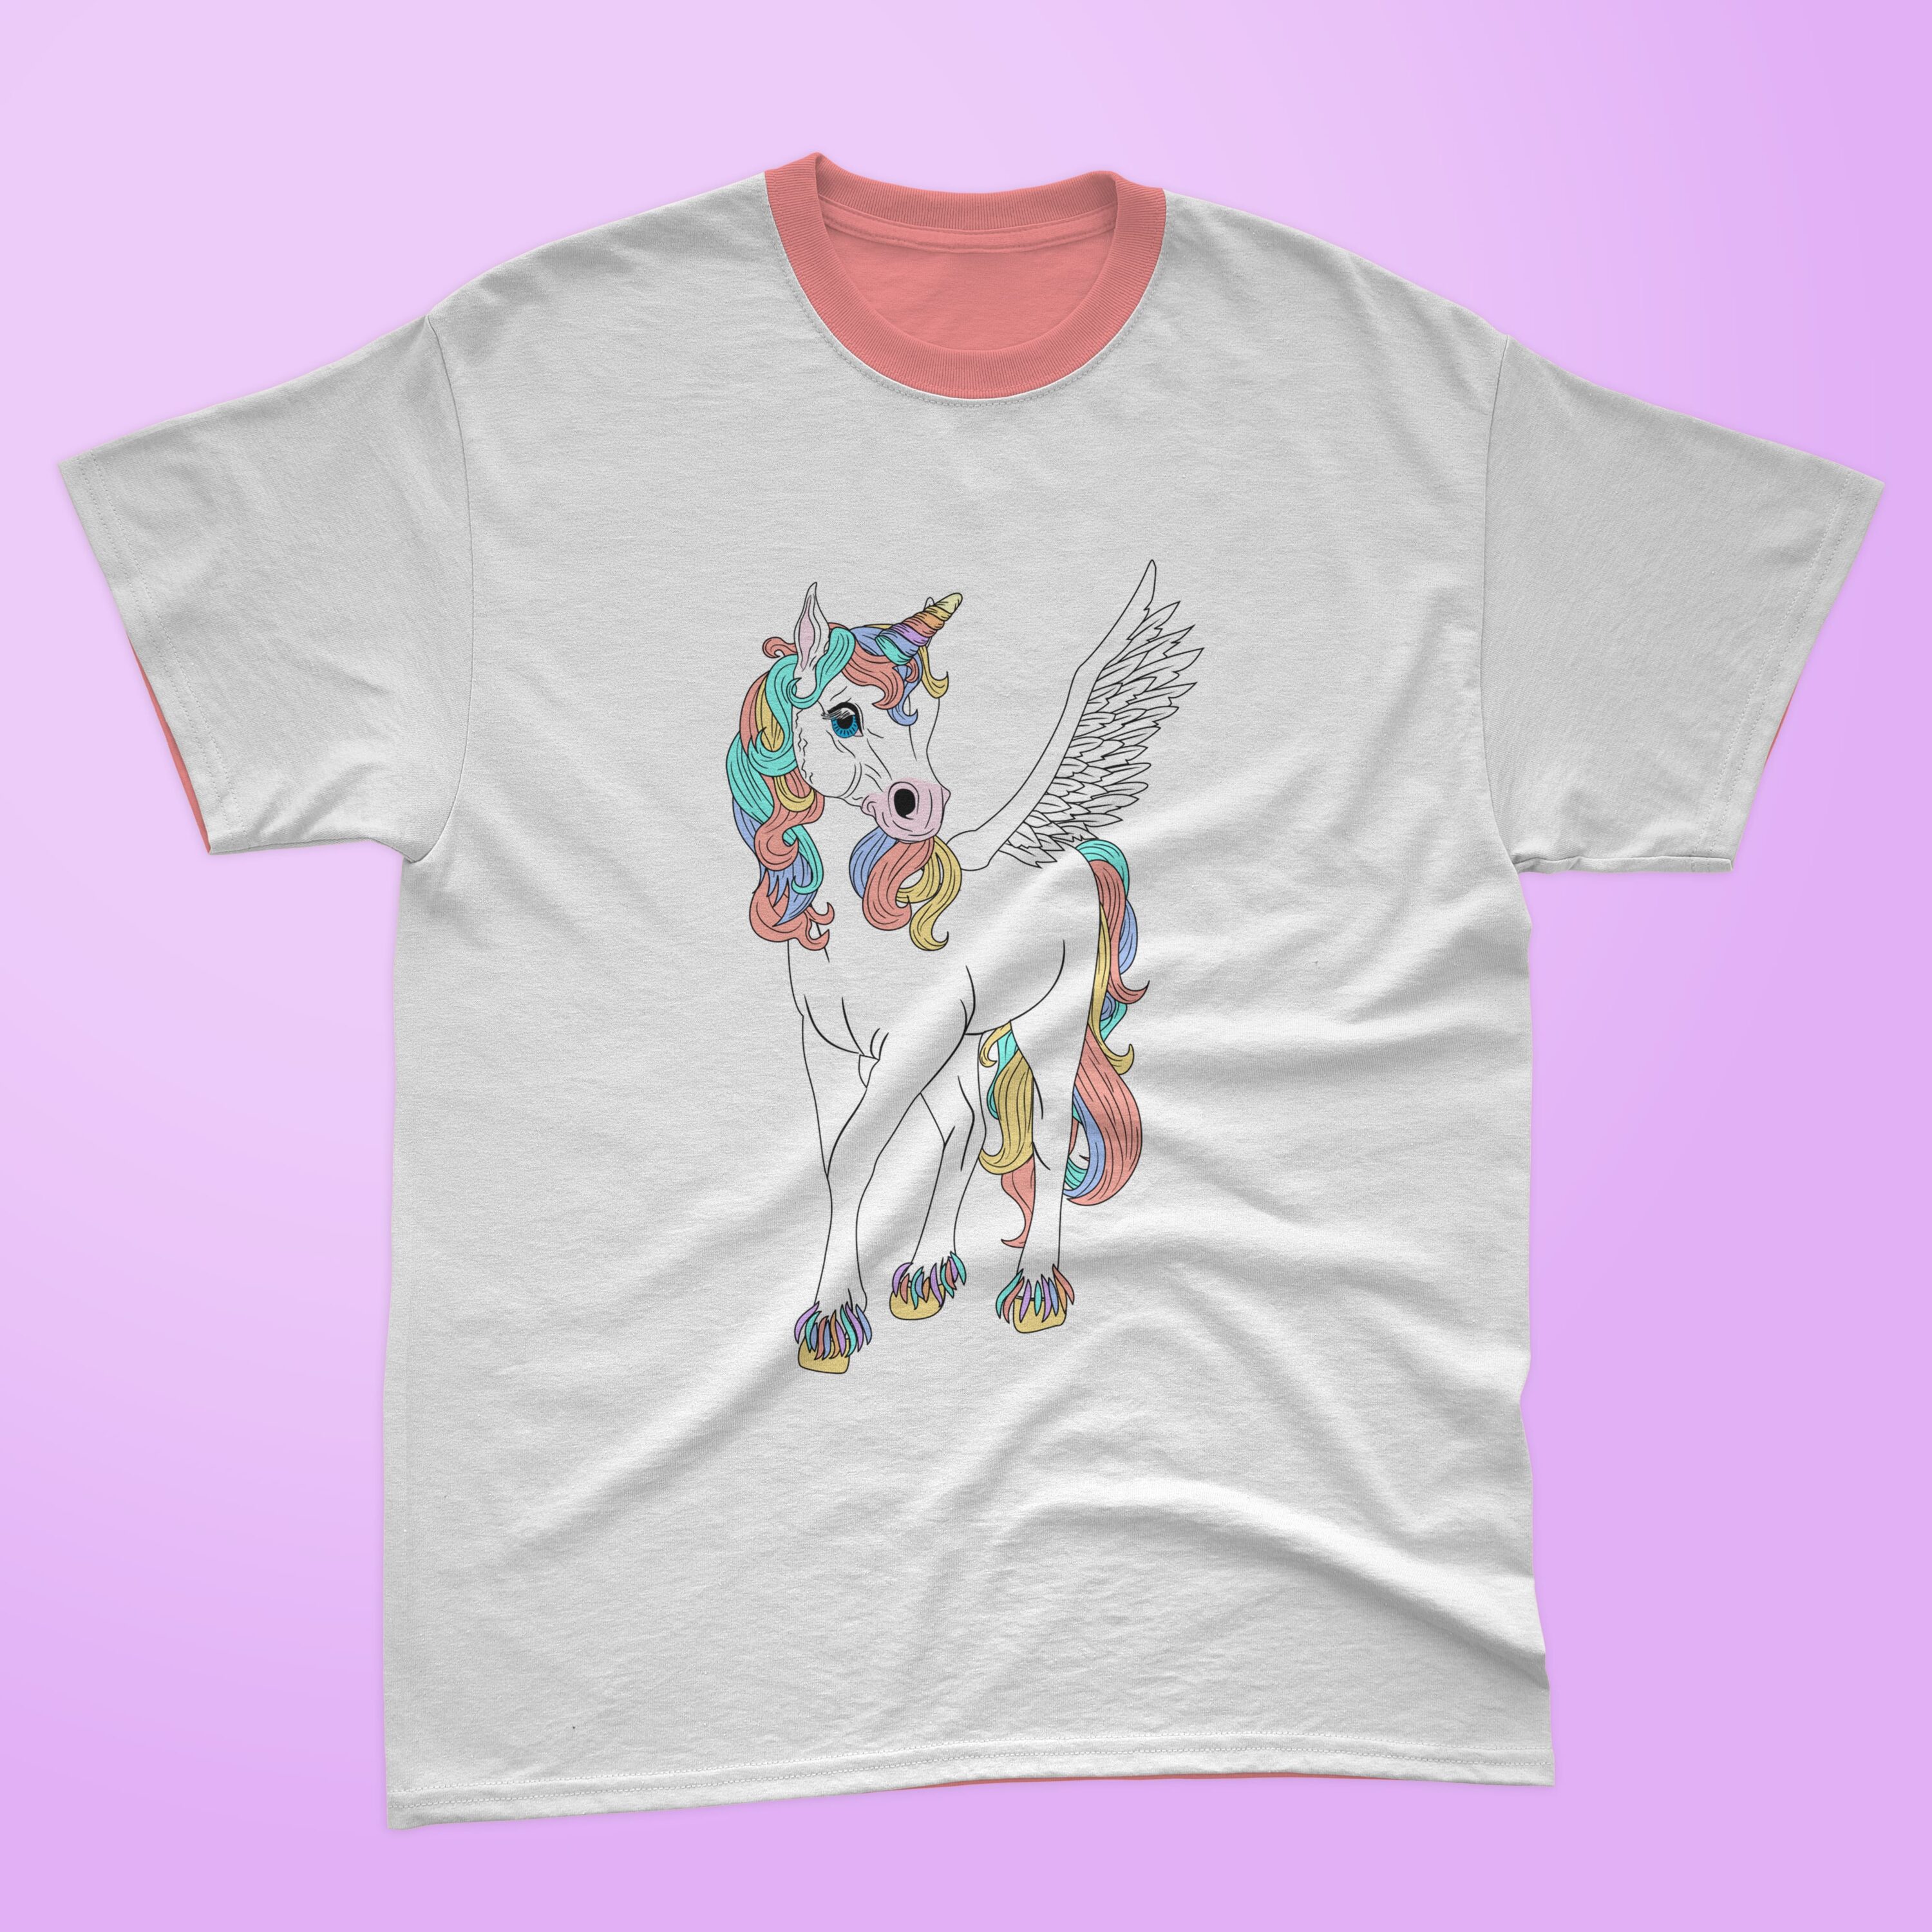 Gray t-shirt with a pink collar and a magical unicorn on a lavender background.